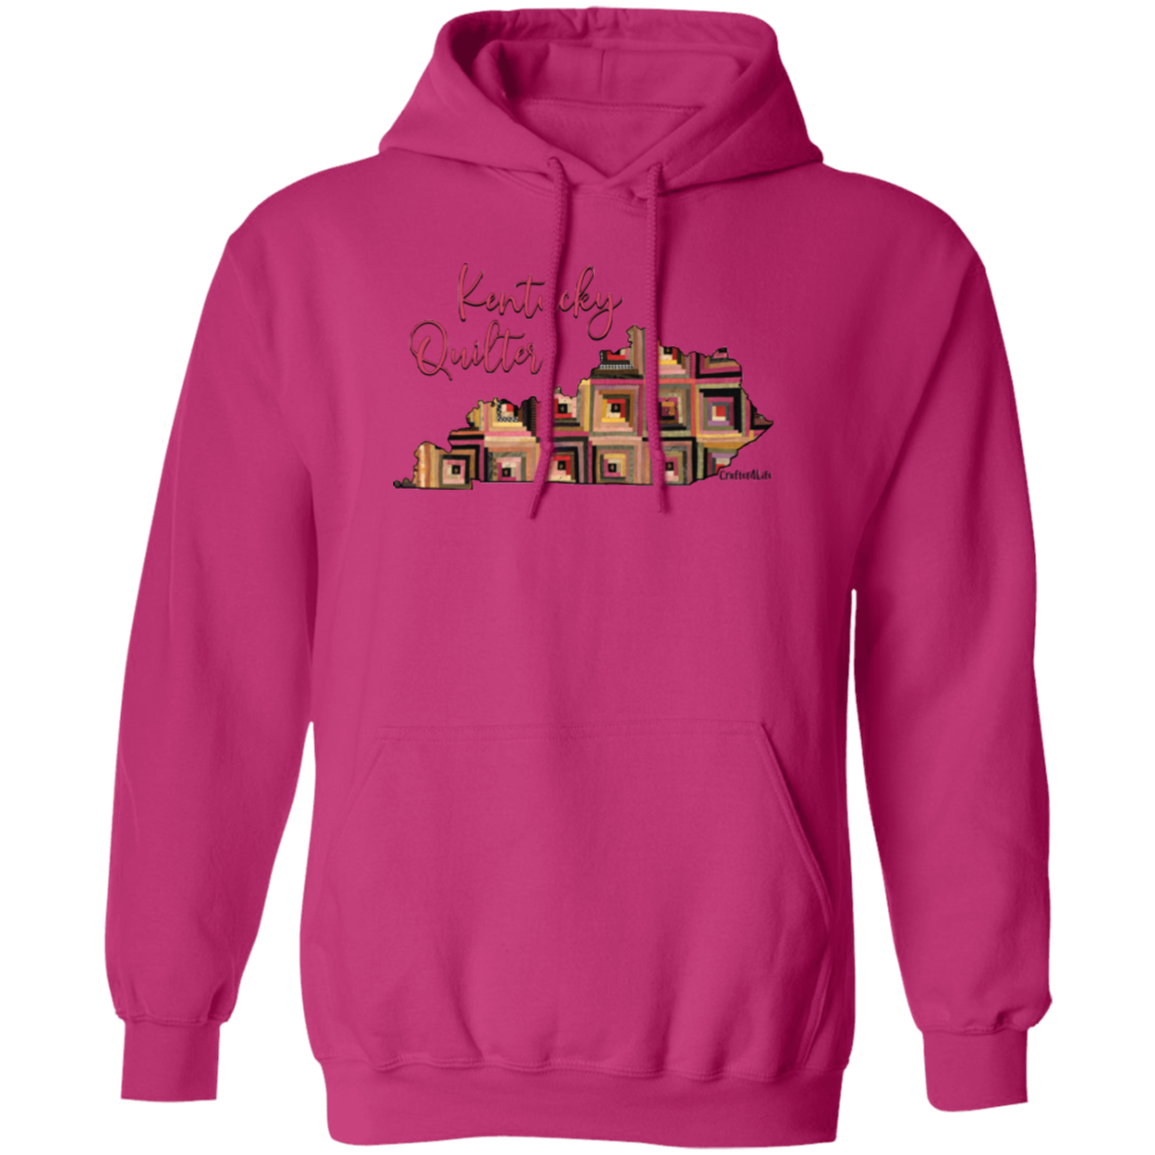 Kentucky Quilter Pullover Hoodie, Gift for Quilting Friends and Family